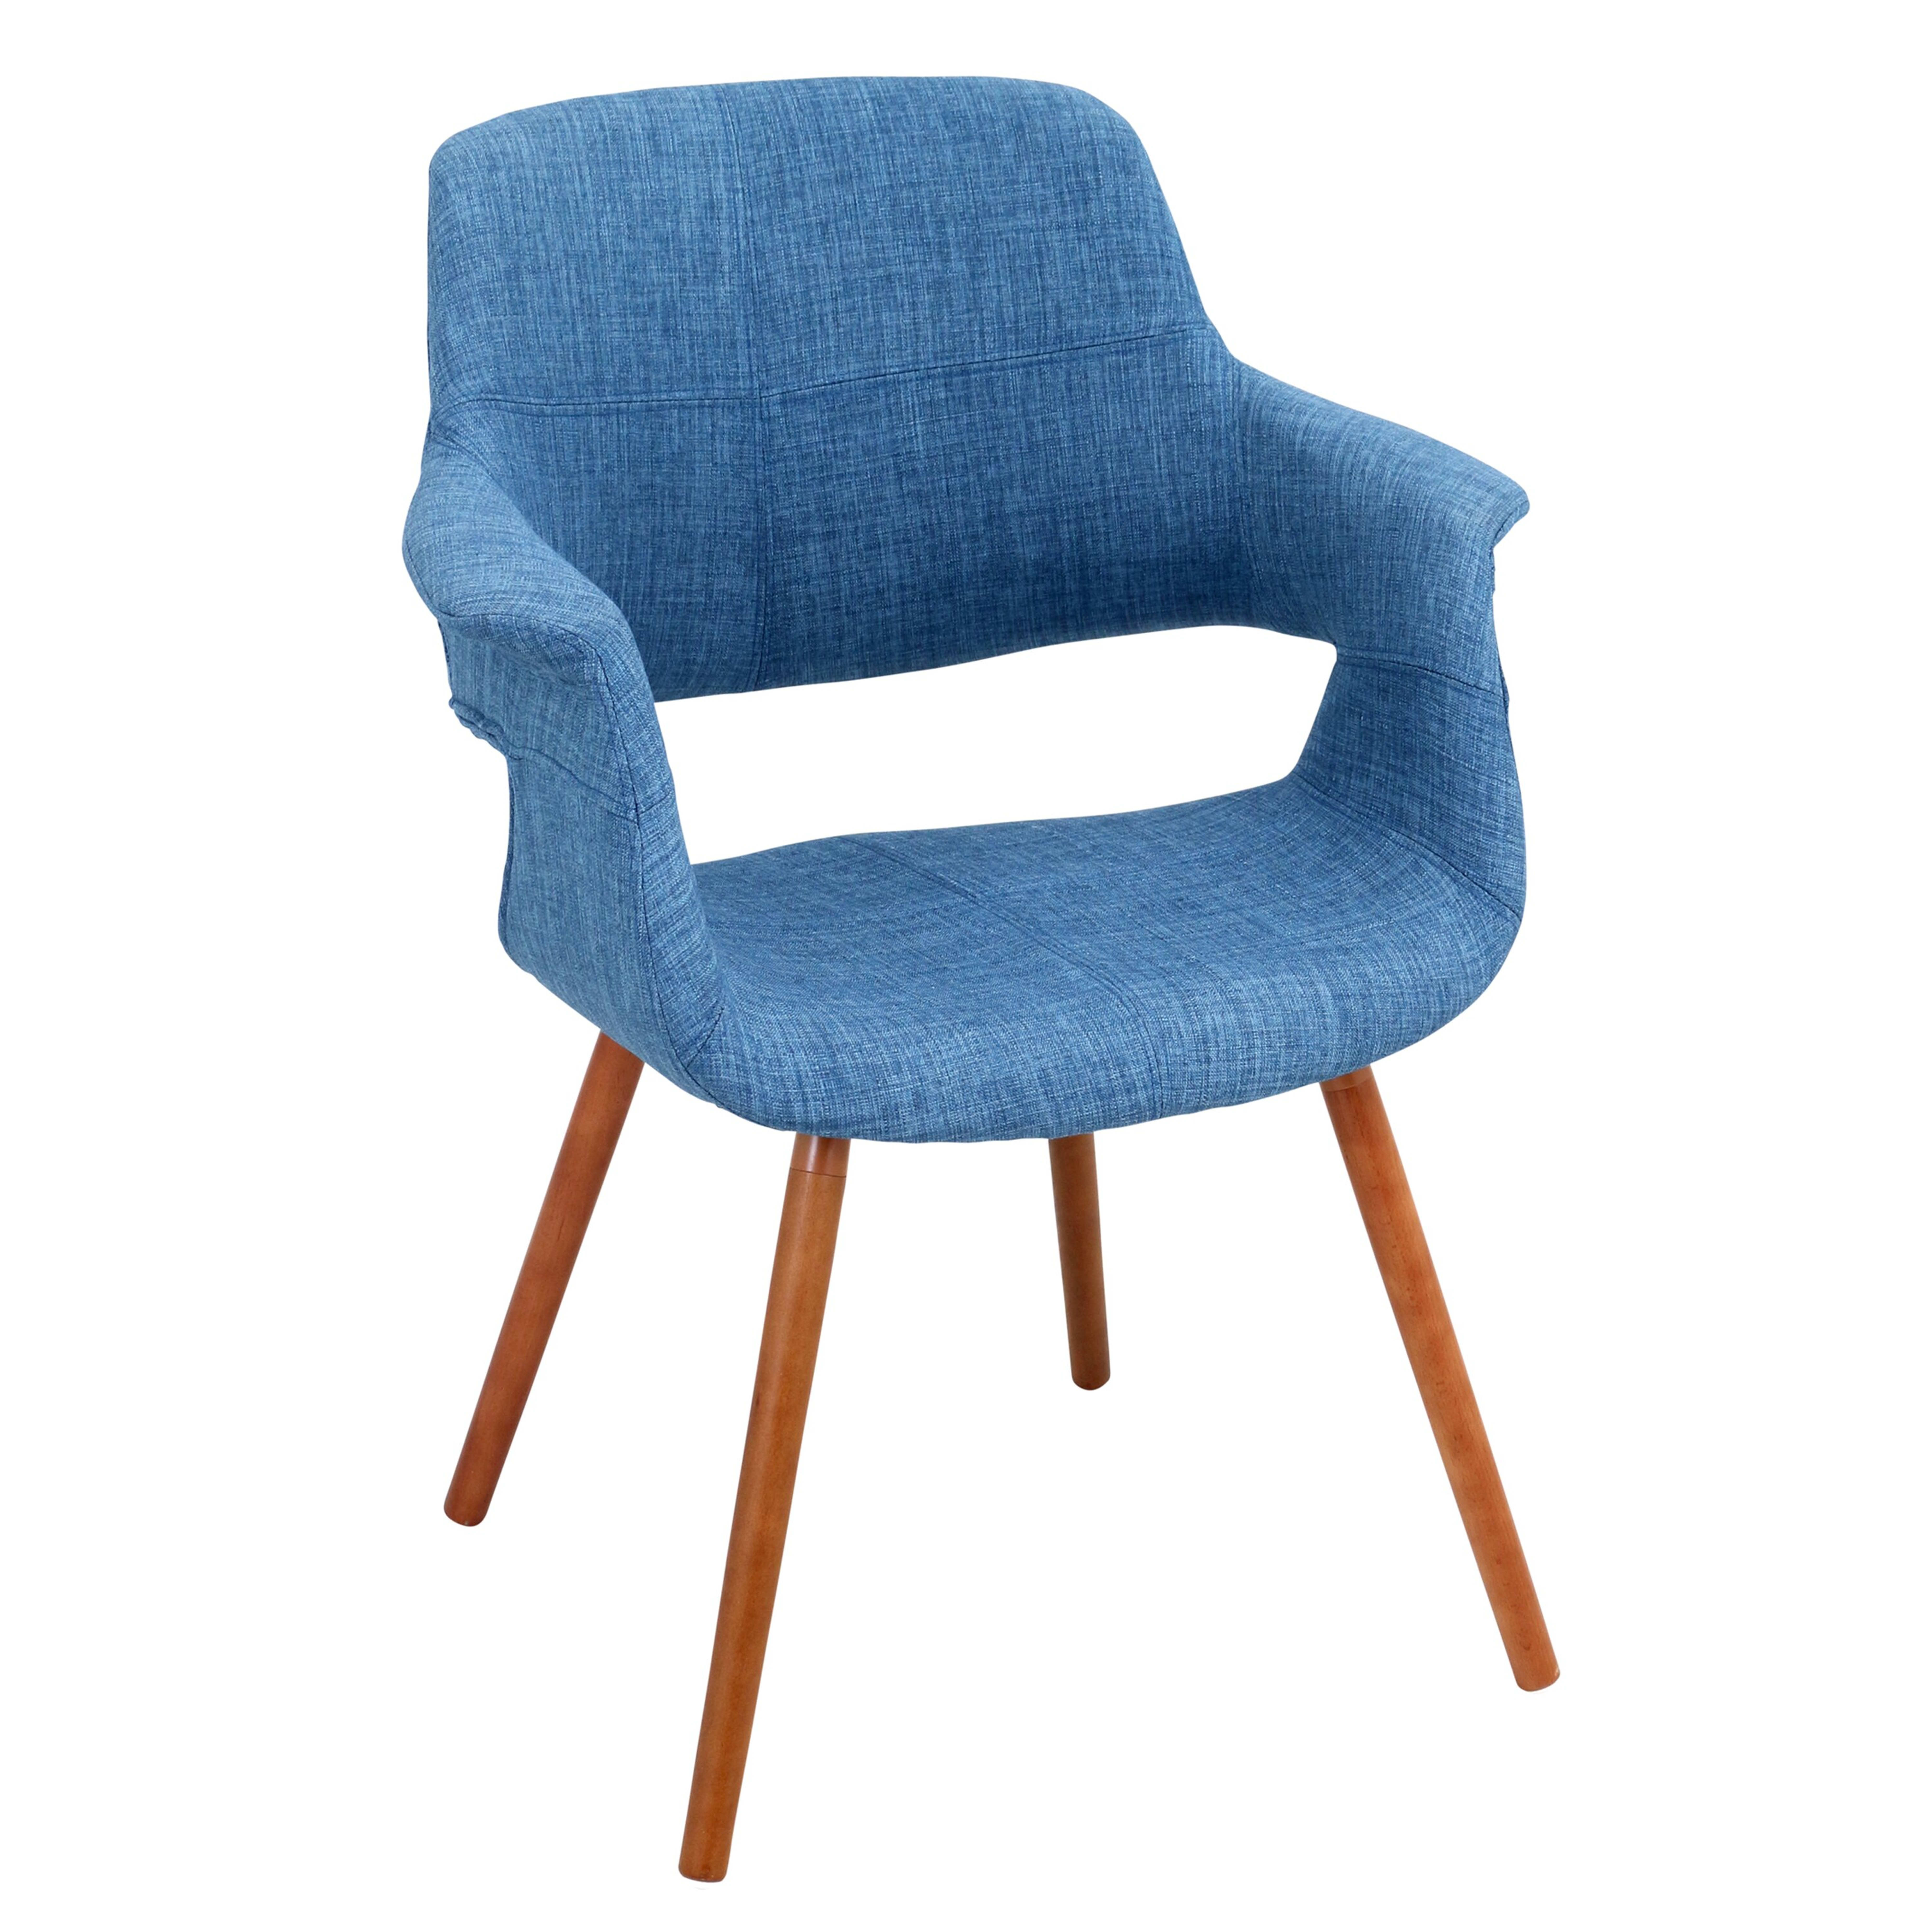 Colby Upholstered Dining Chair - Wayfair